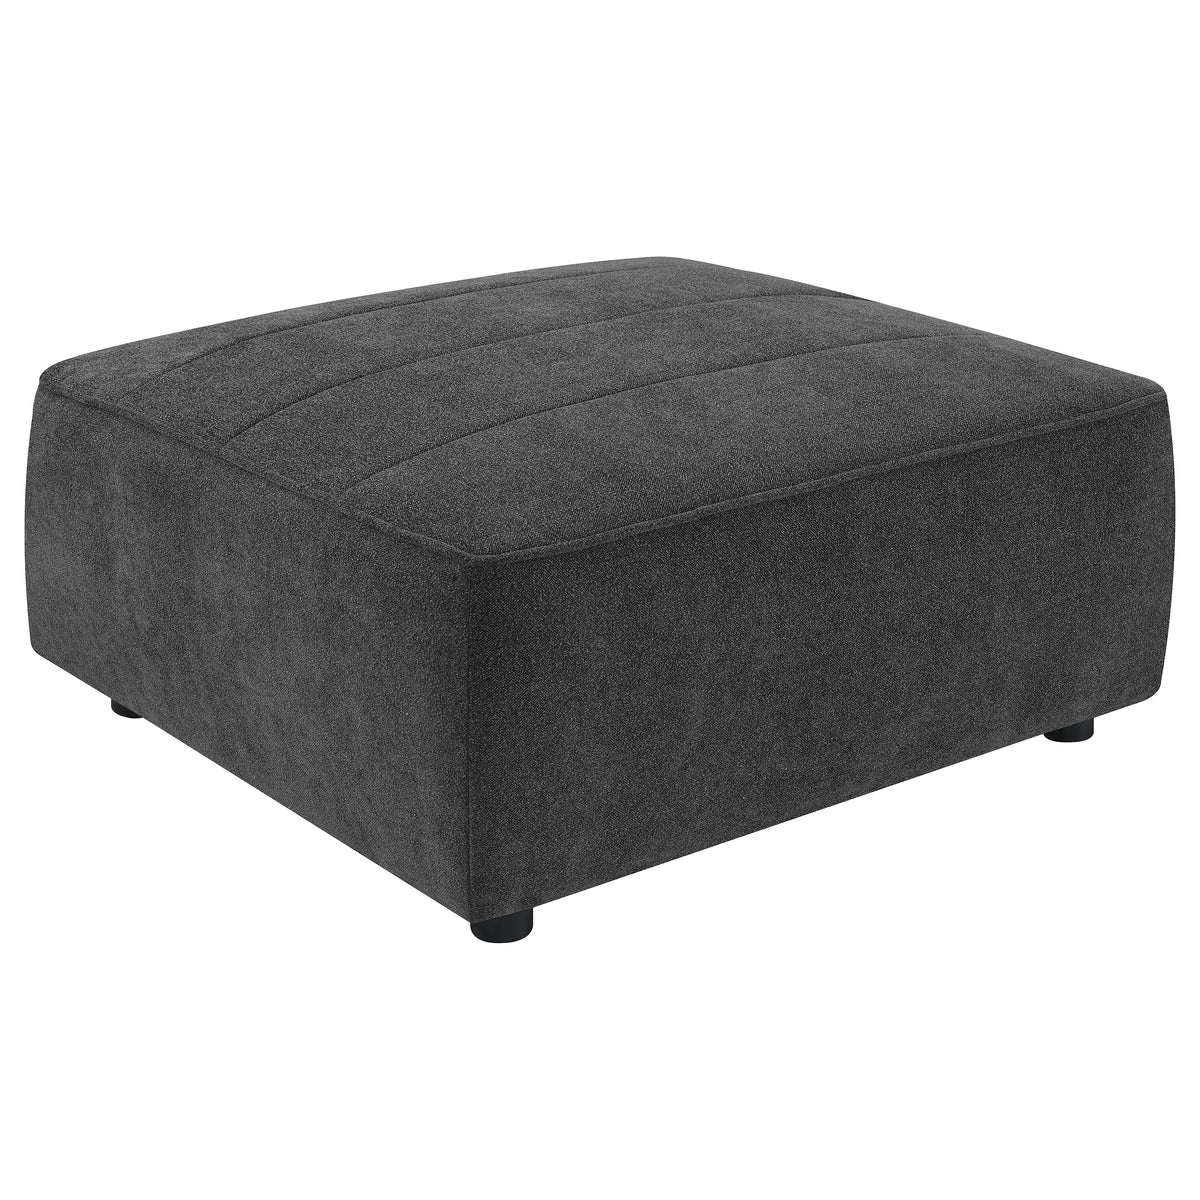 Sunny Upholstered Square Ottoman Dark Charcoal  Las Vegas Furniture Stores